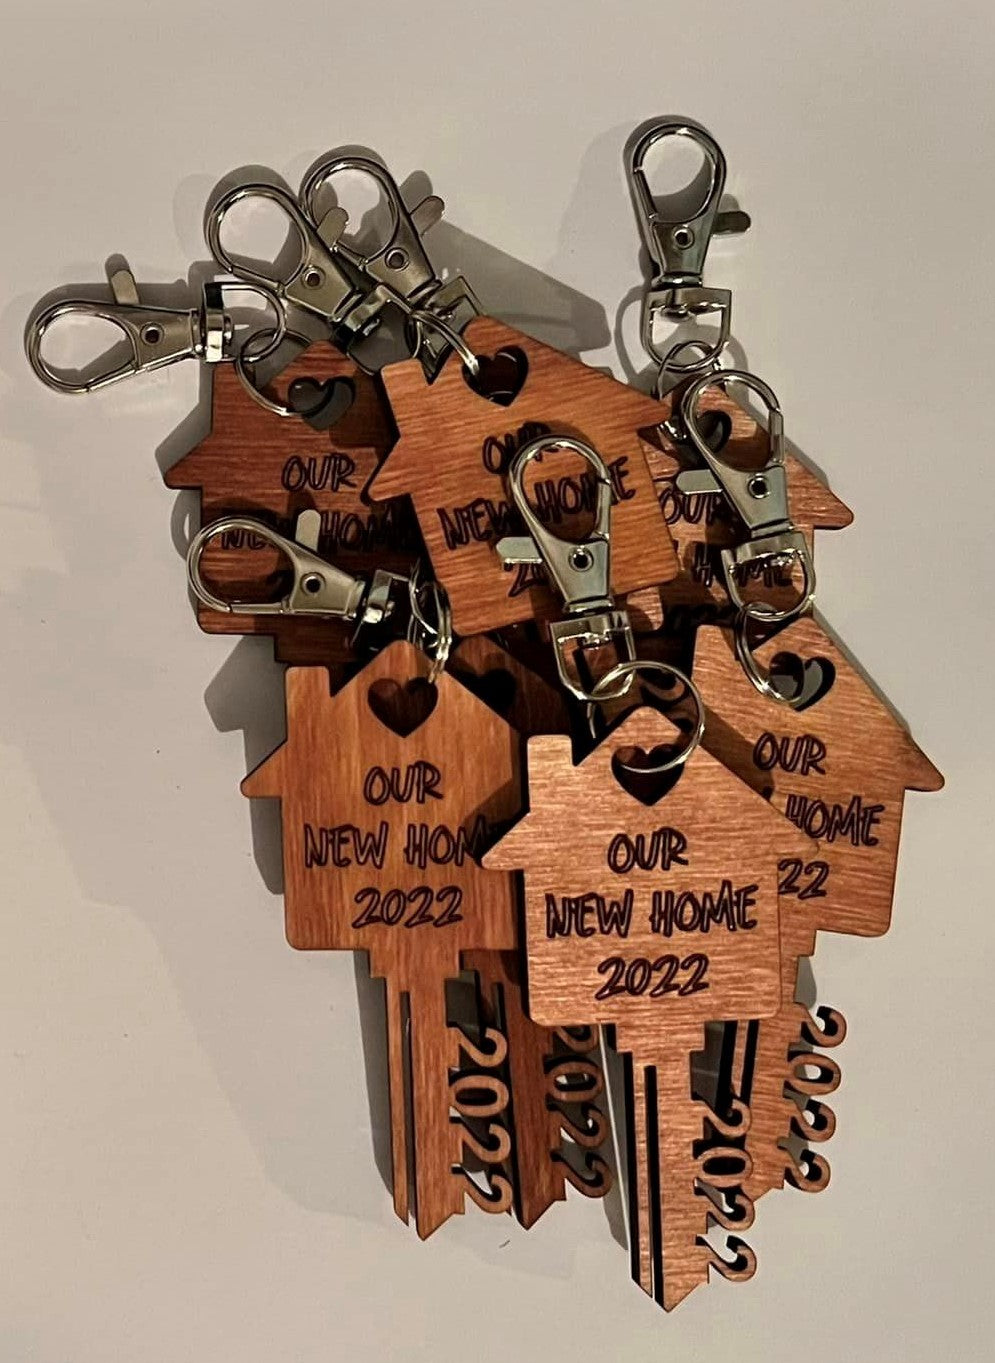 LASER CUT KEYCHAIN "OUR NEW HOME 2022"